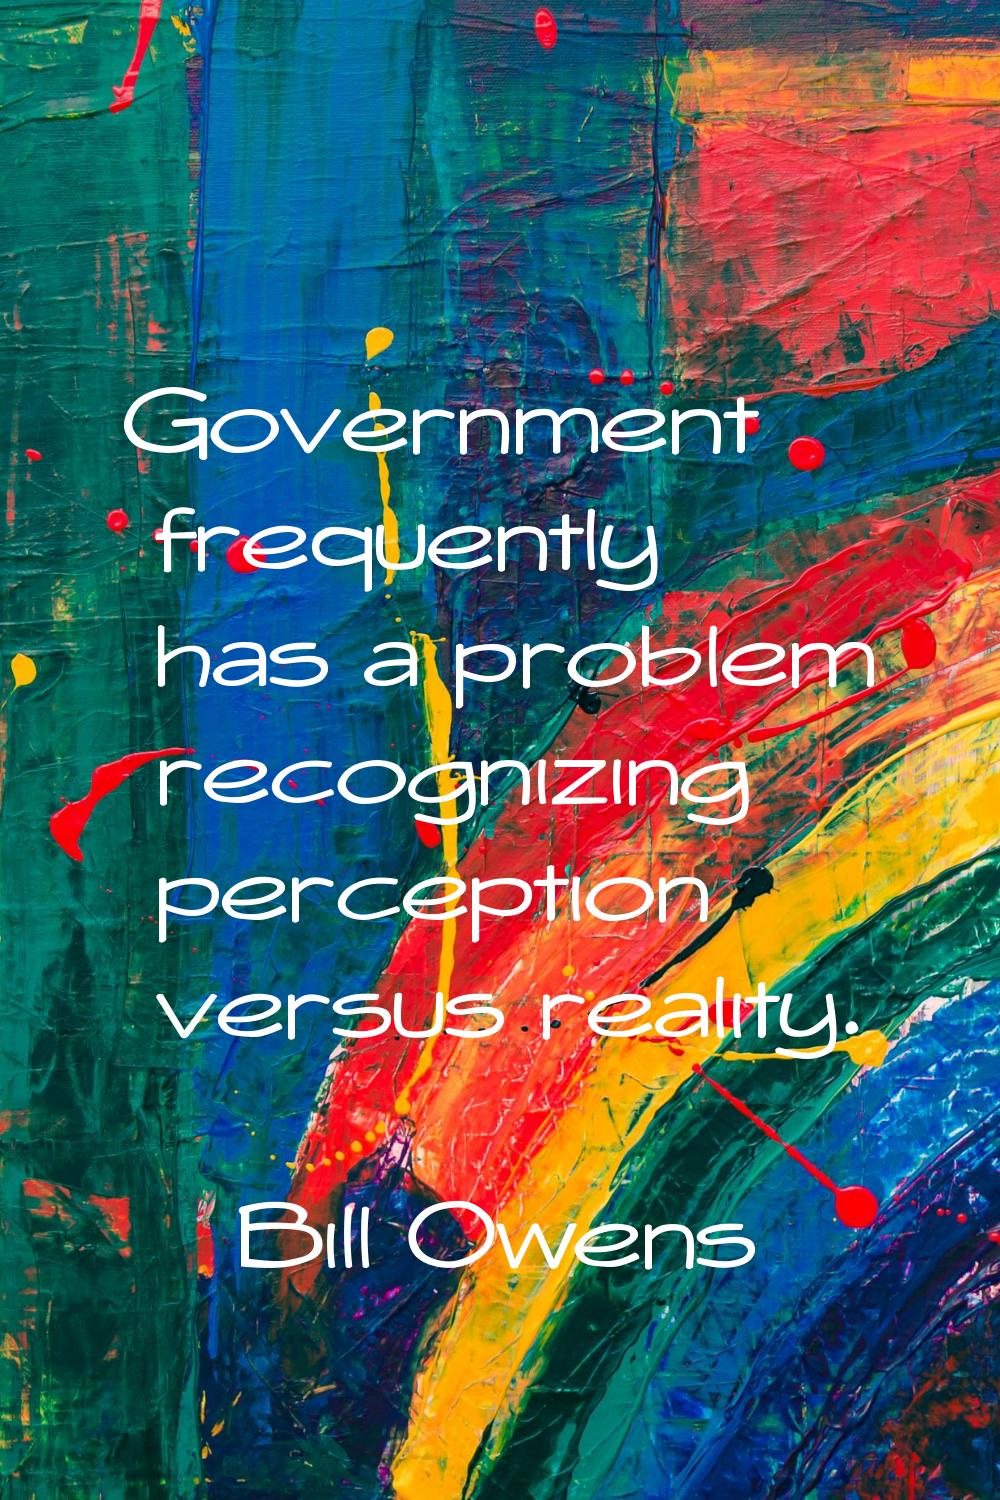 Government frequently has a problem recognizing perception versus reality.